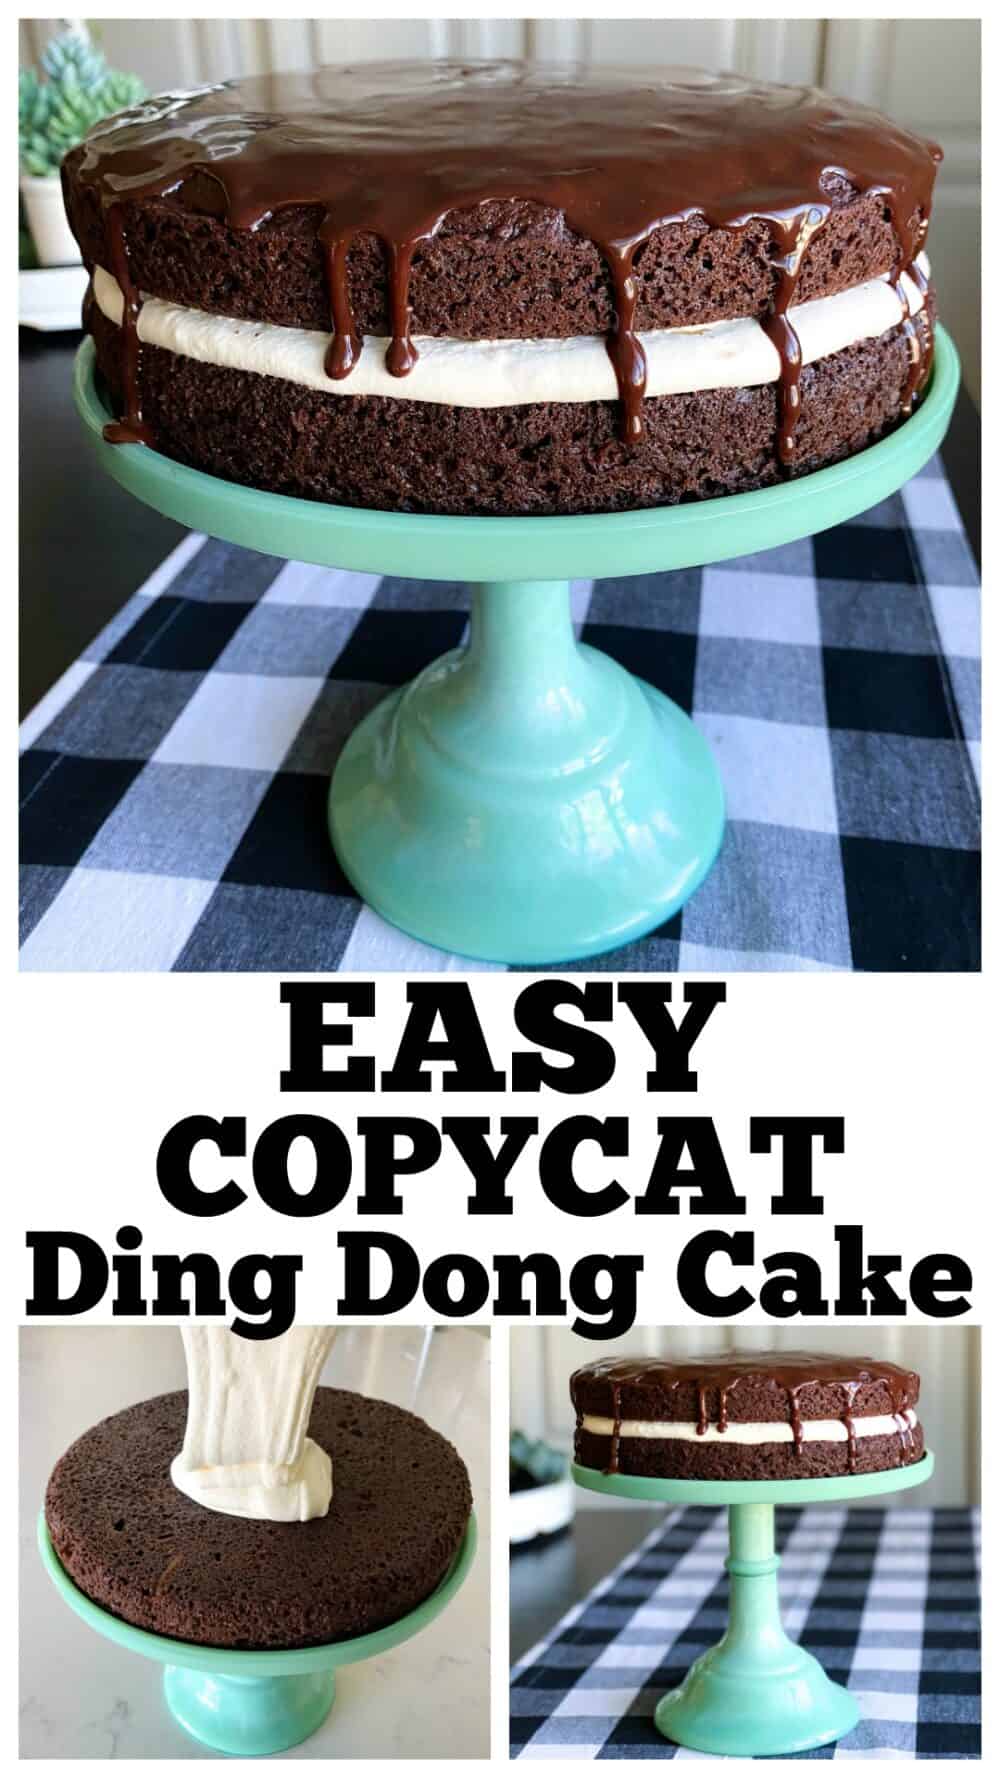 photo collage of ding dong cake